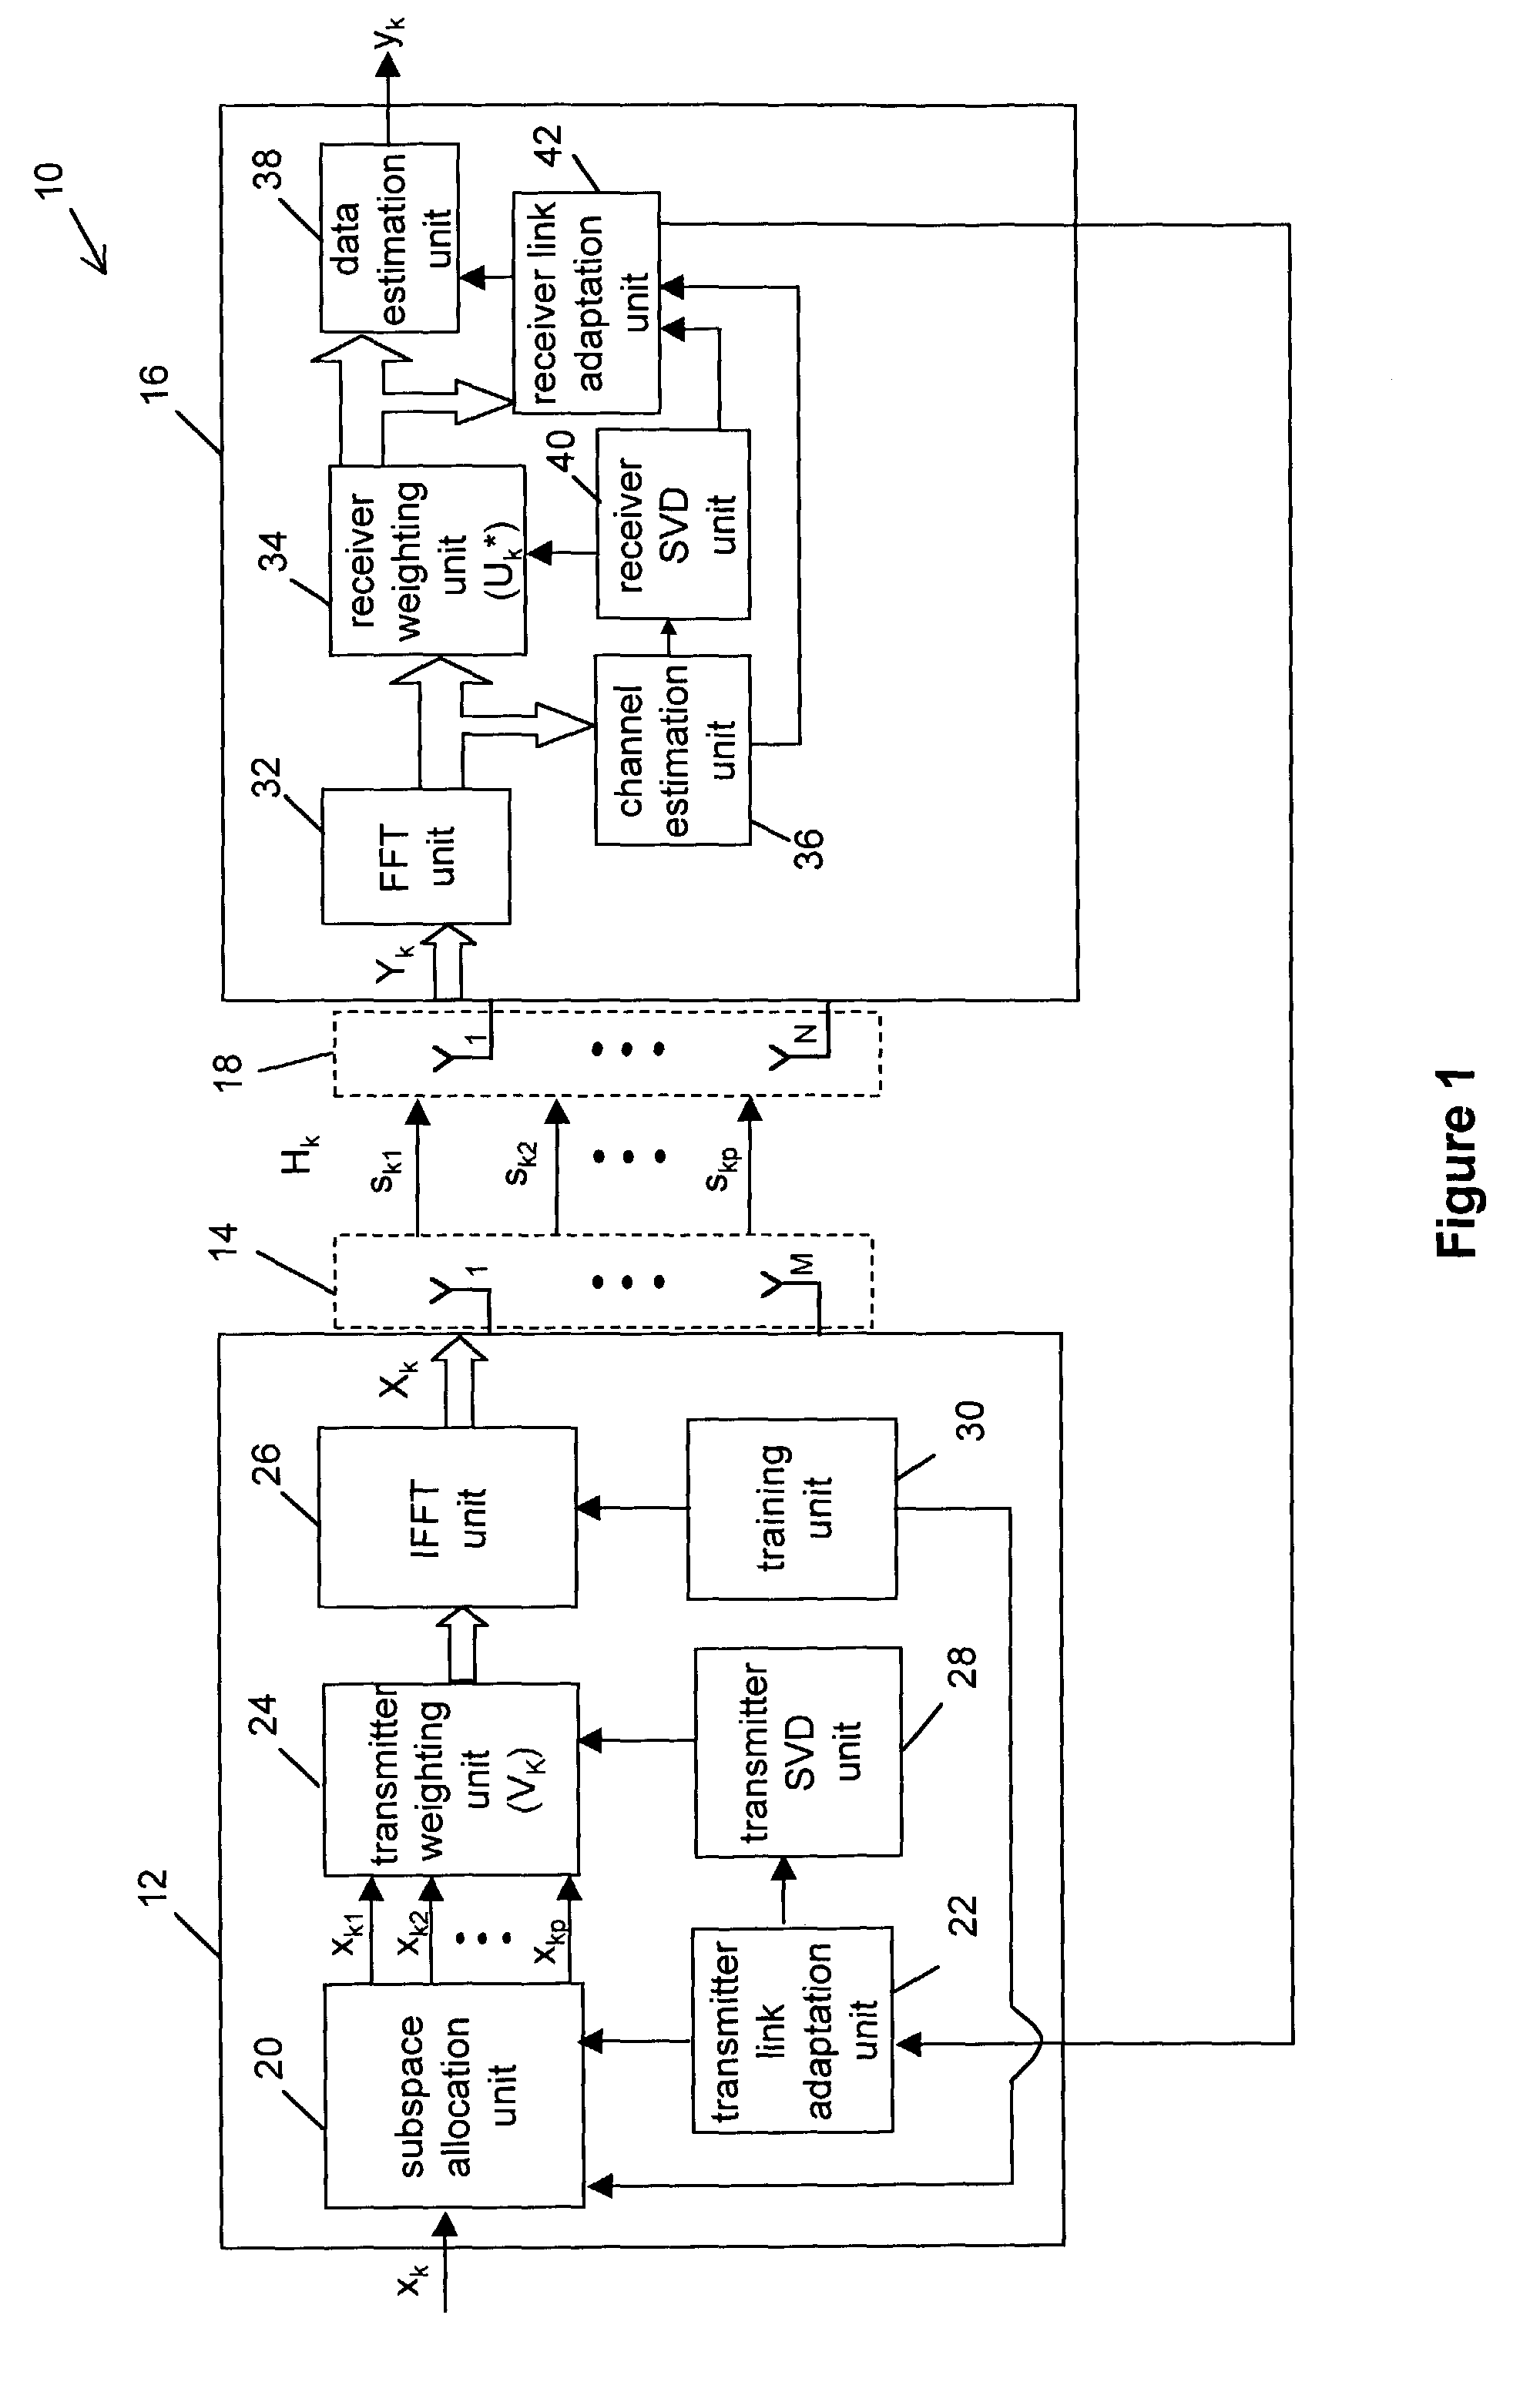 System and method for wireless communication systems